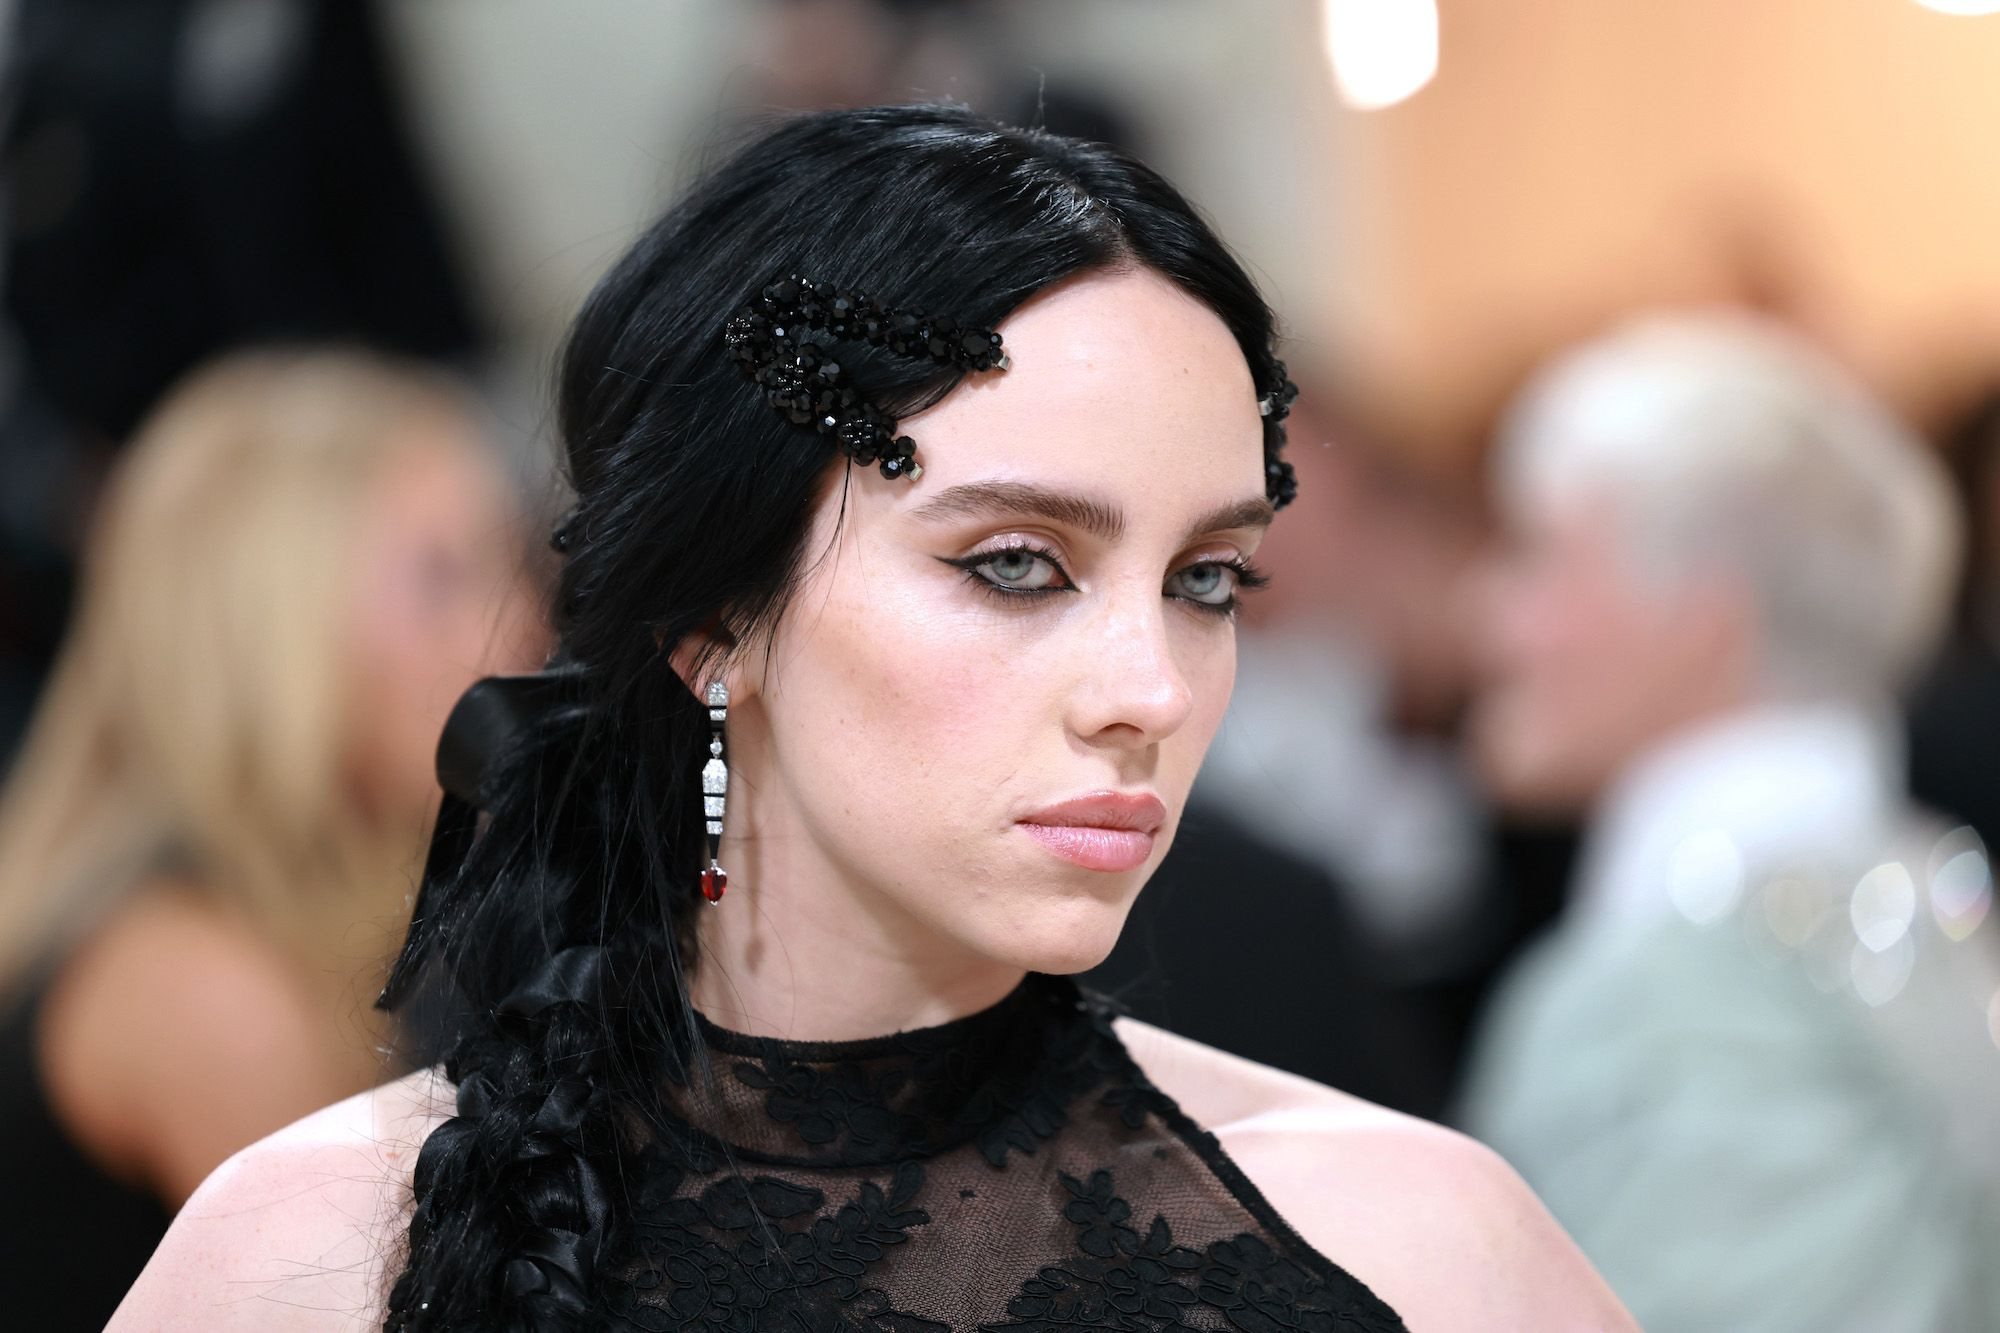 billie eilish at the met gall in may courtesy getty images